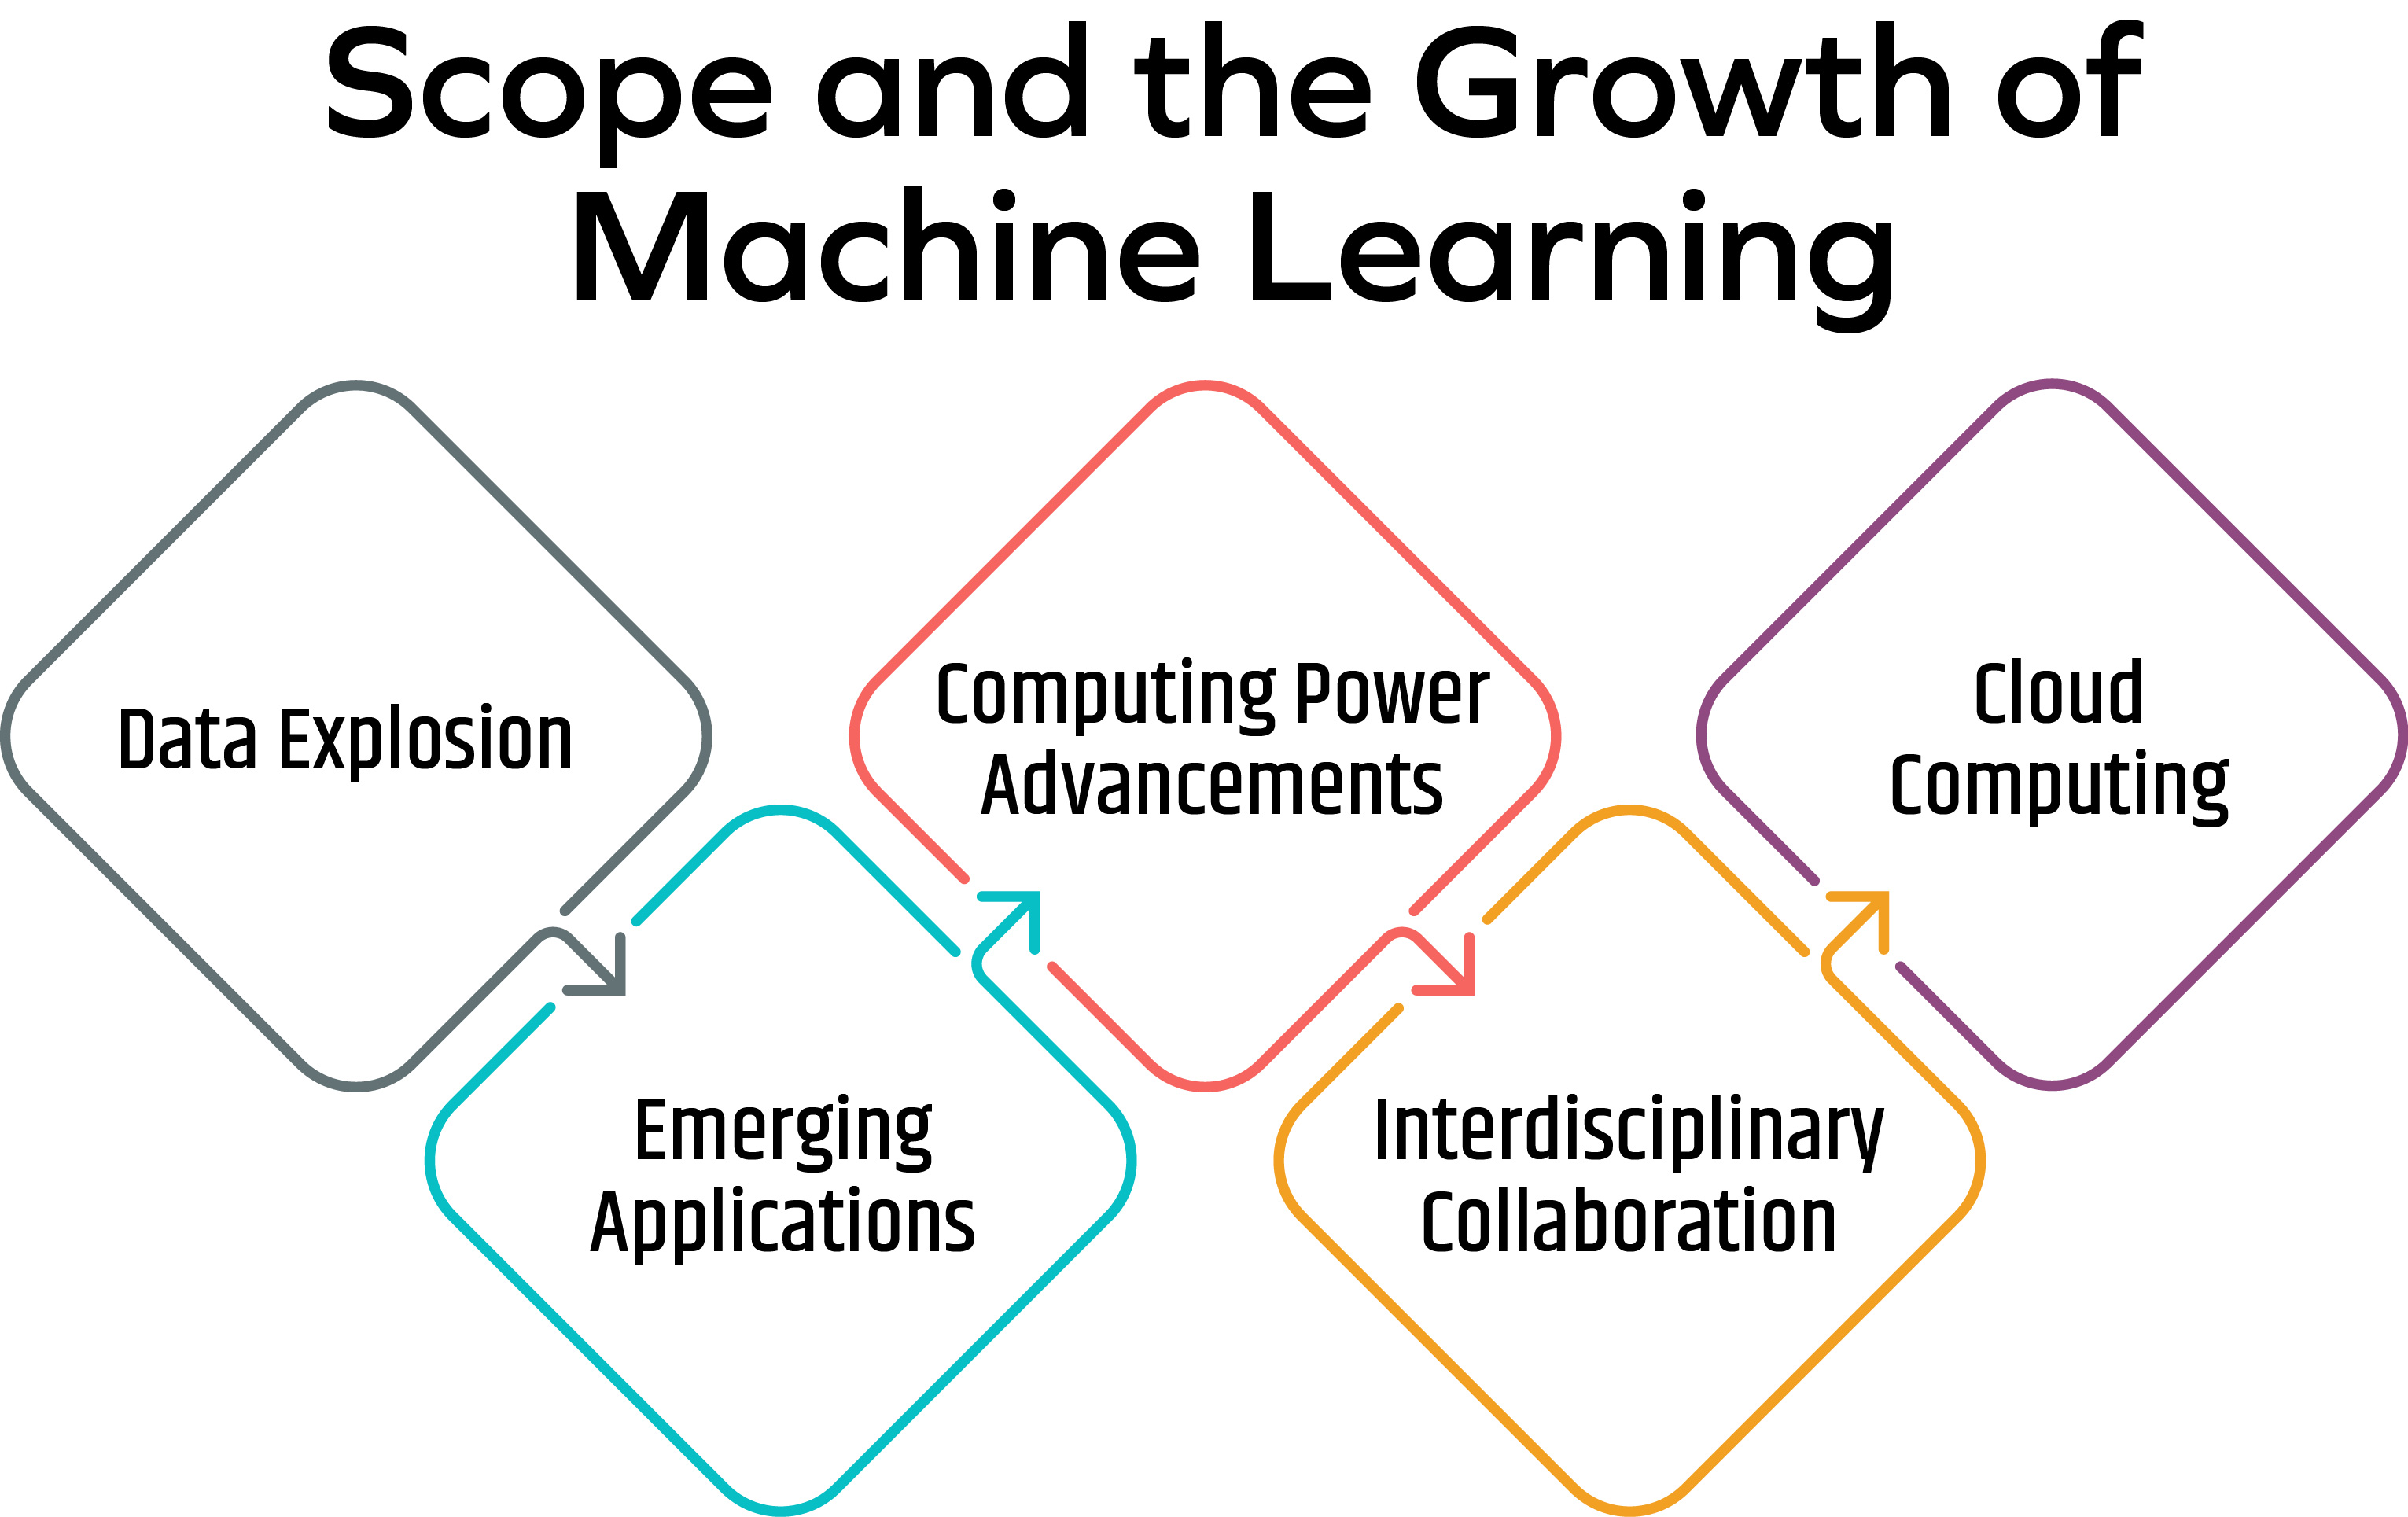 Scope and the Growth of Machine Learning